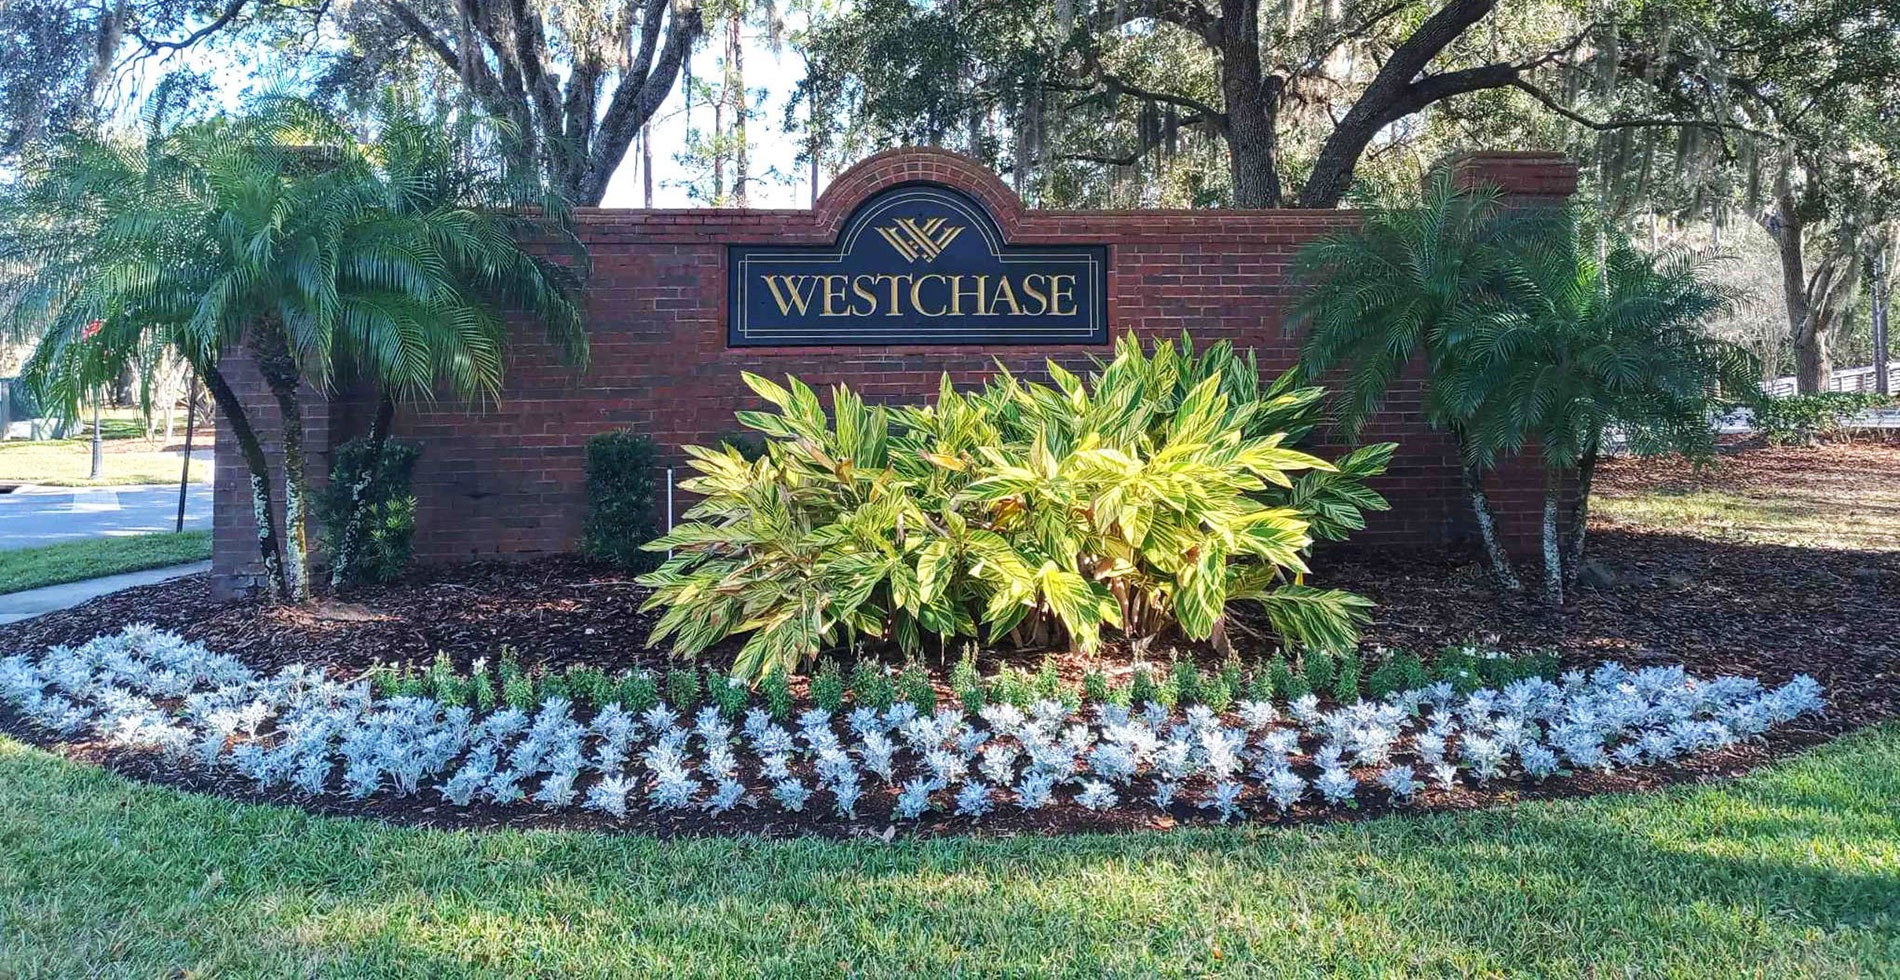 Aquatic Fitness Classes in Westchase - Westchase WOW